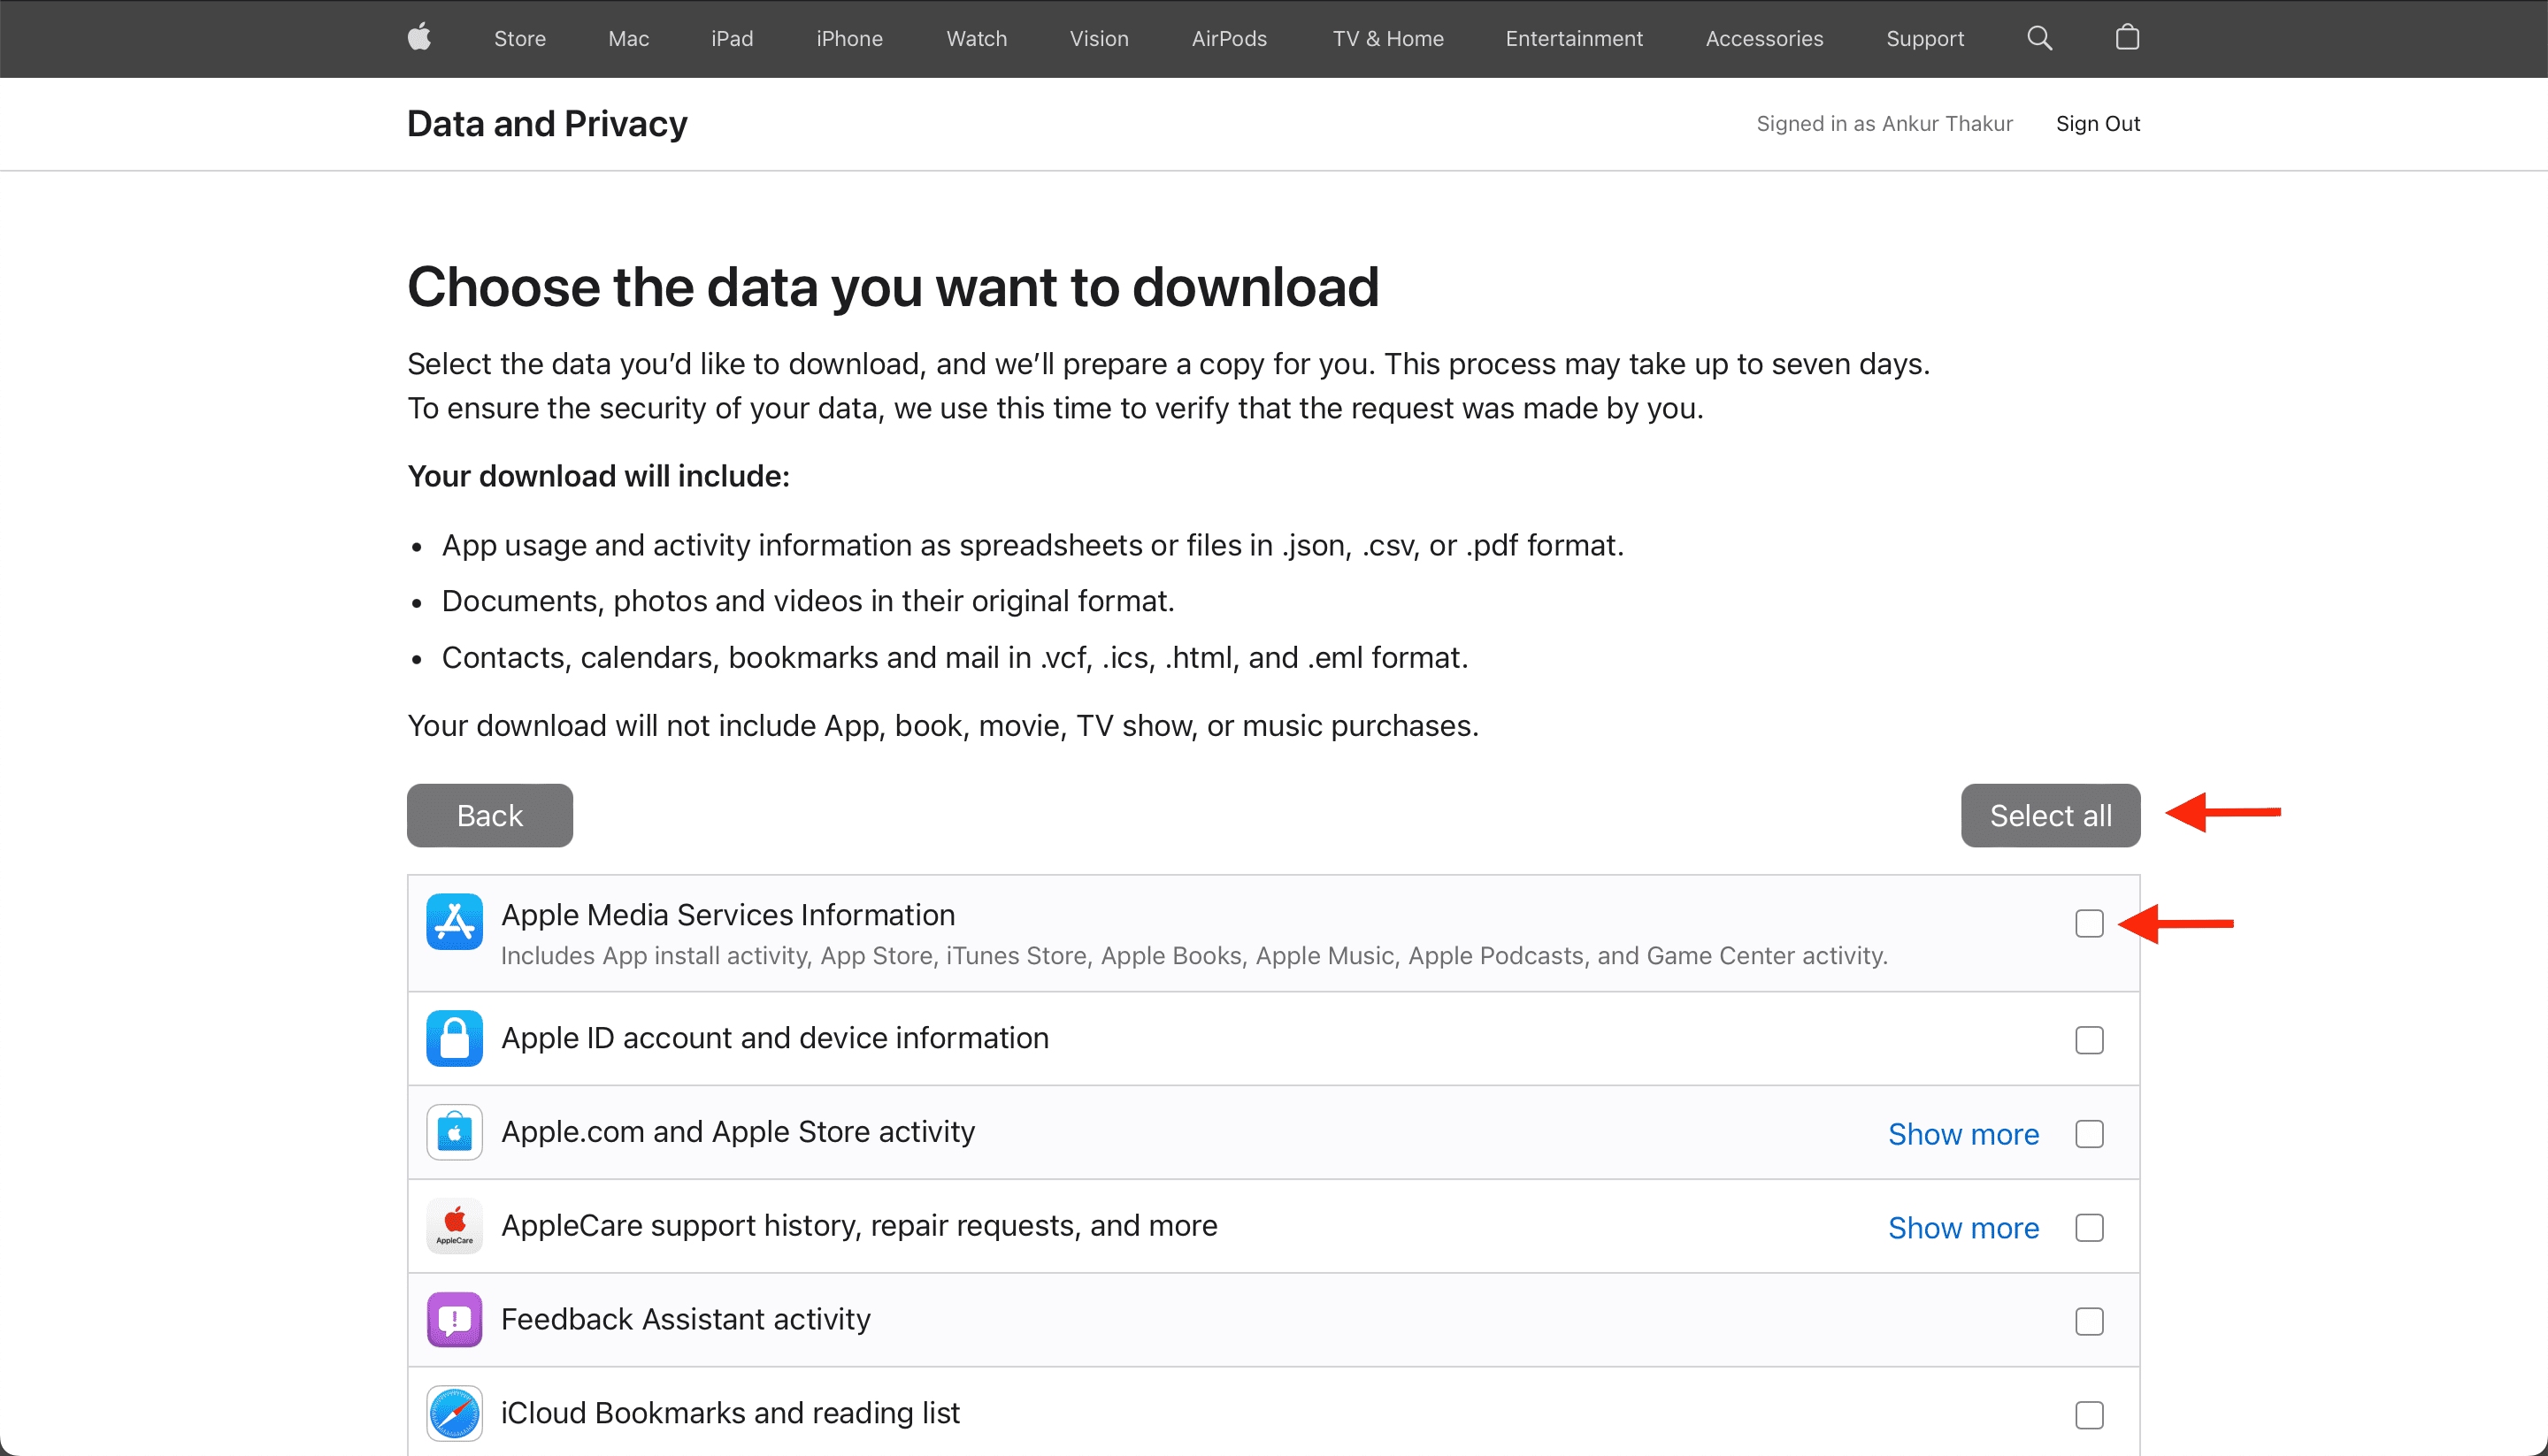 Choose the data you want to download